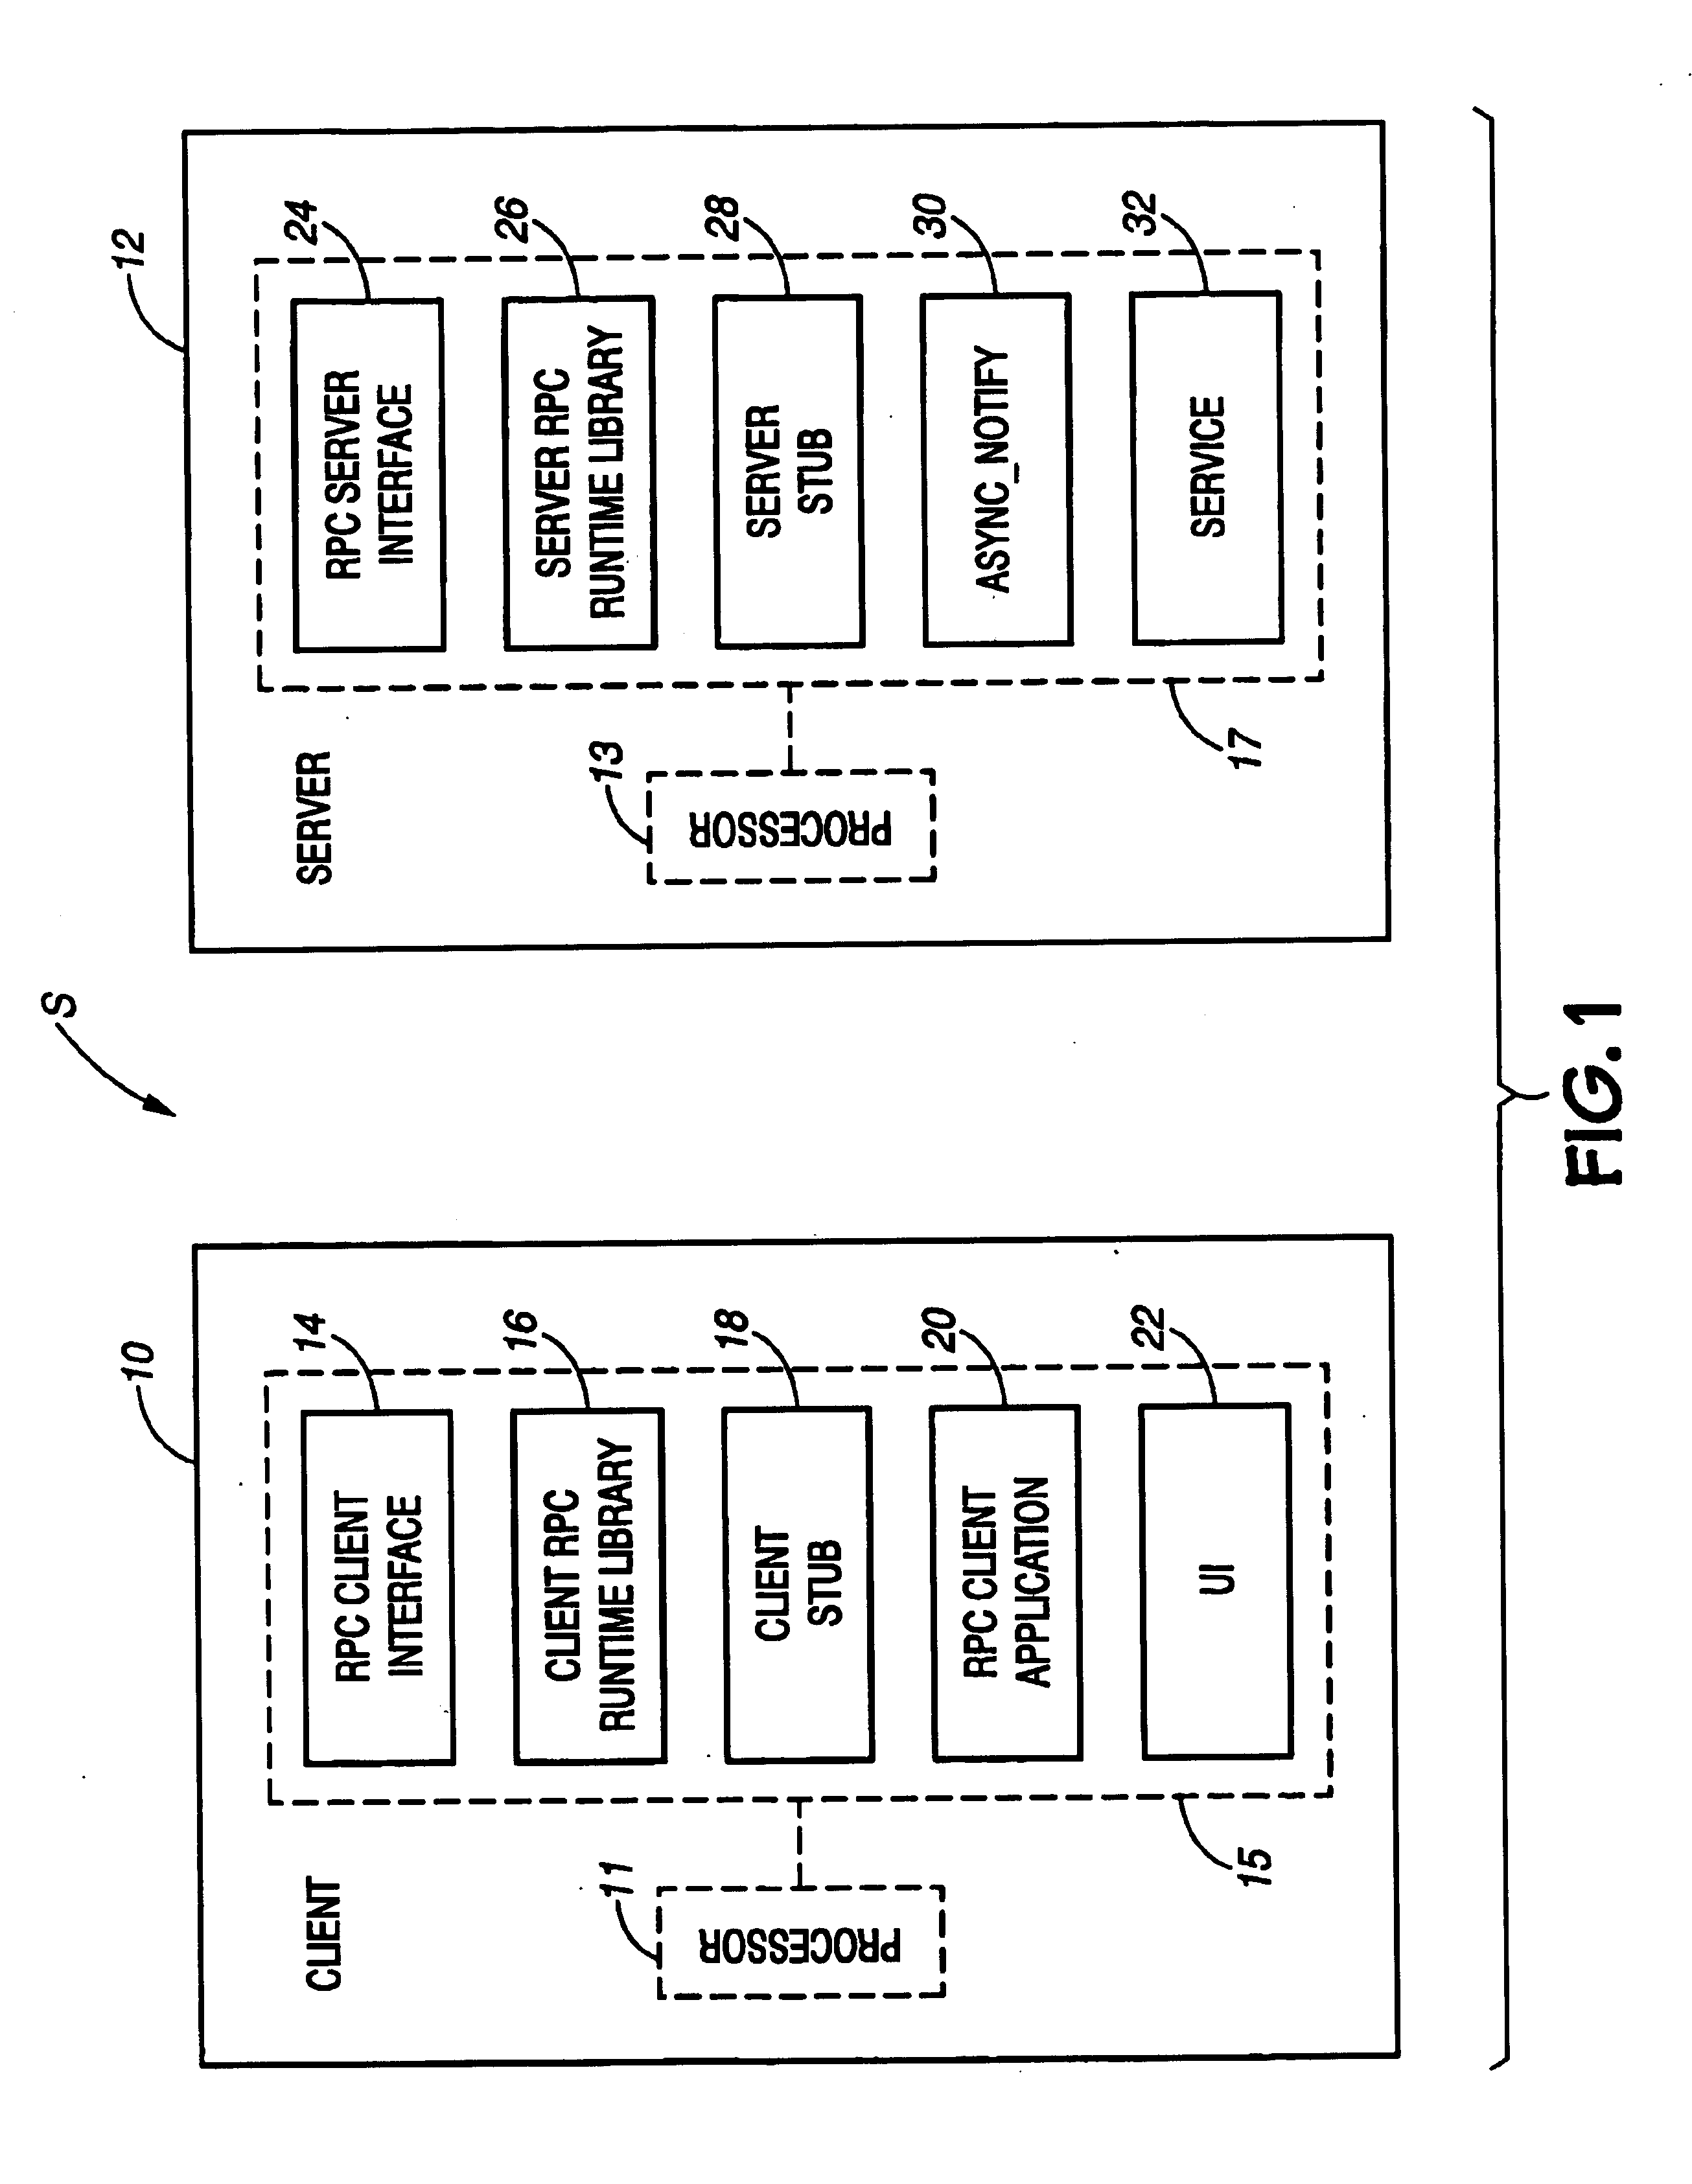 Method of communicating asynchronous events to remote procedure call clients